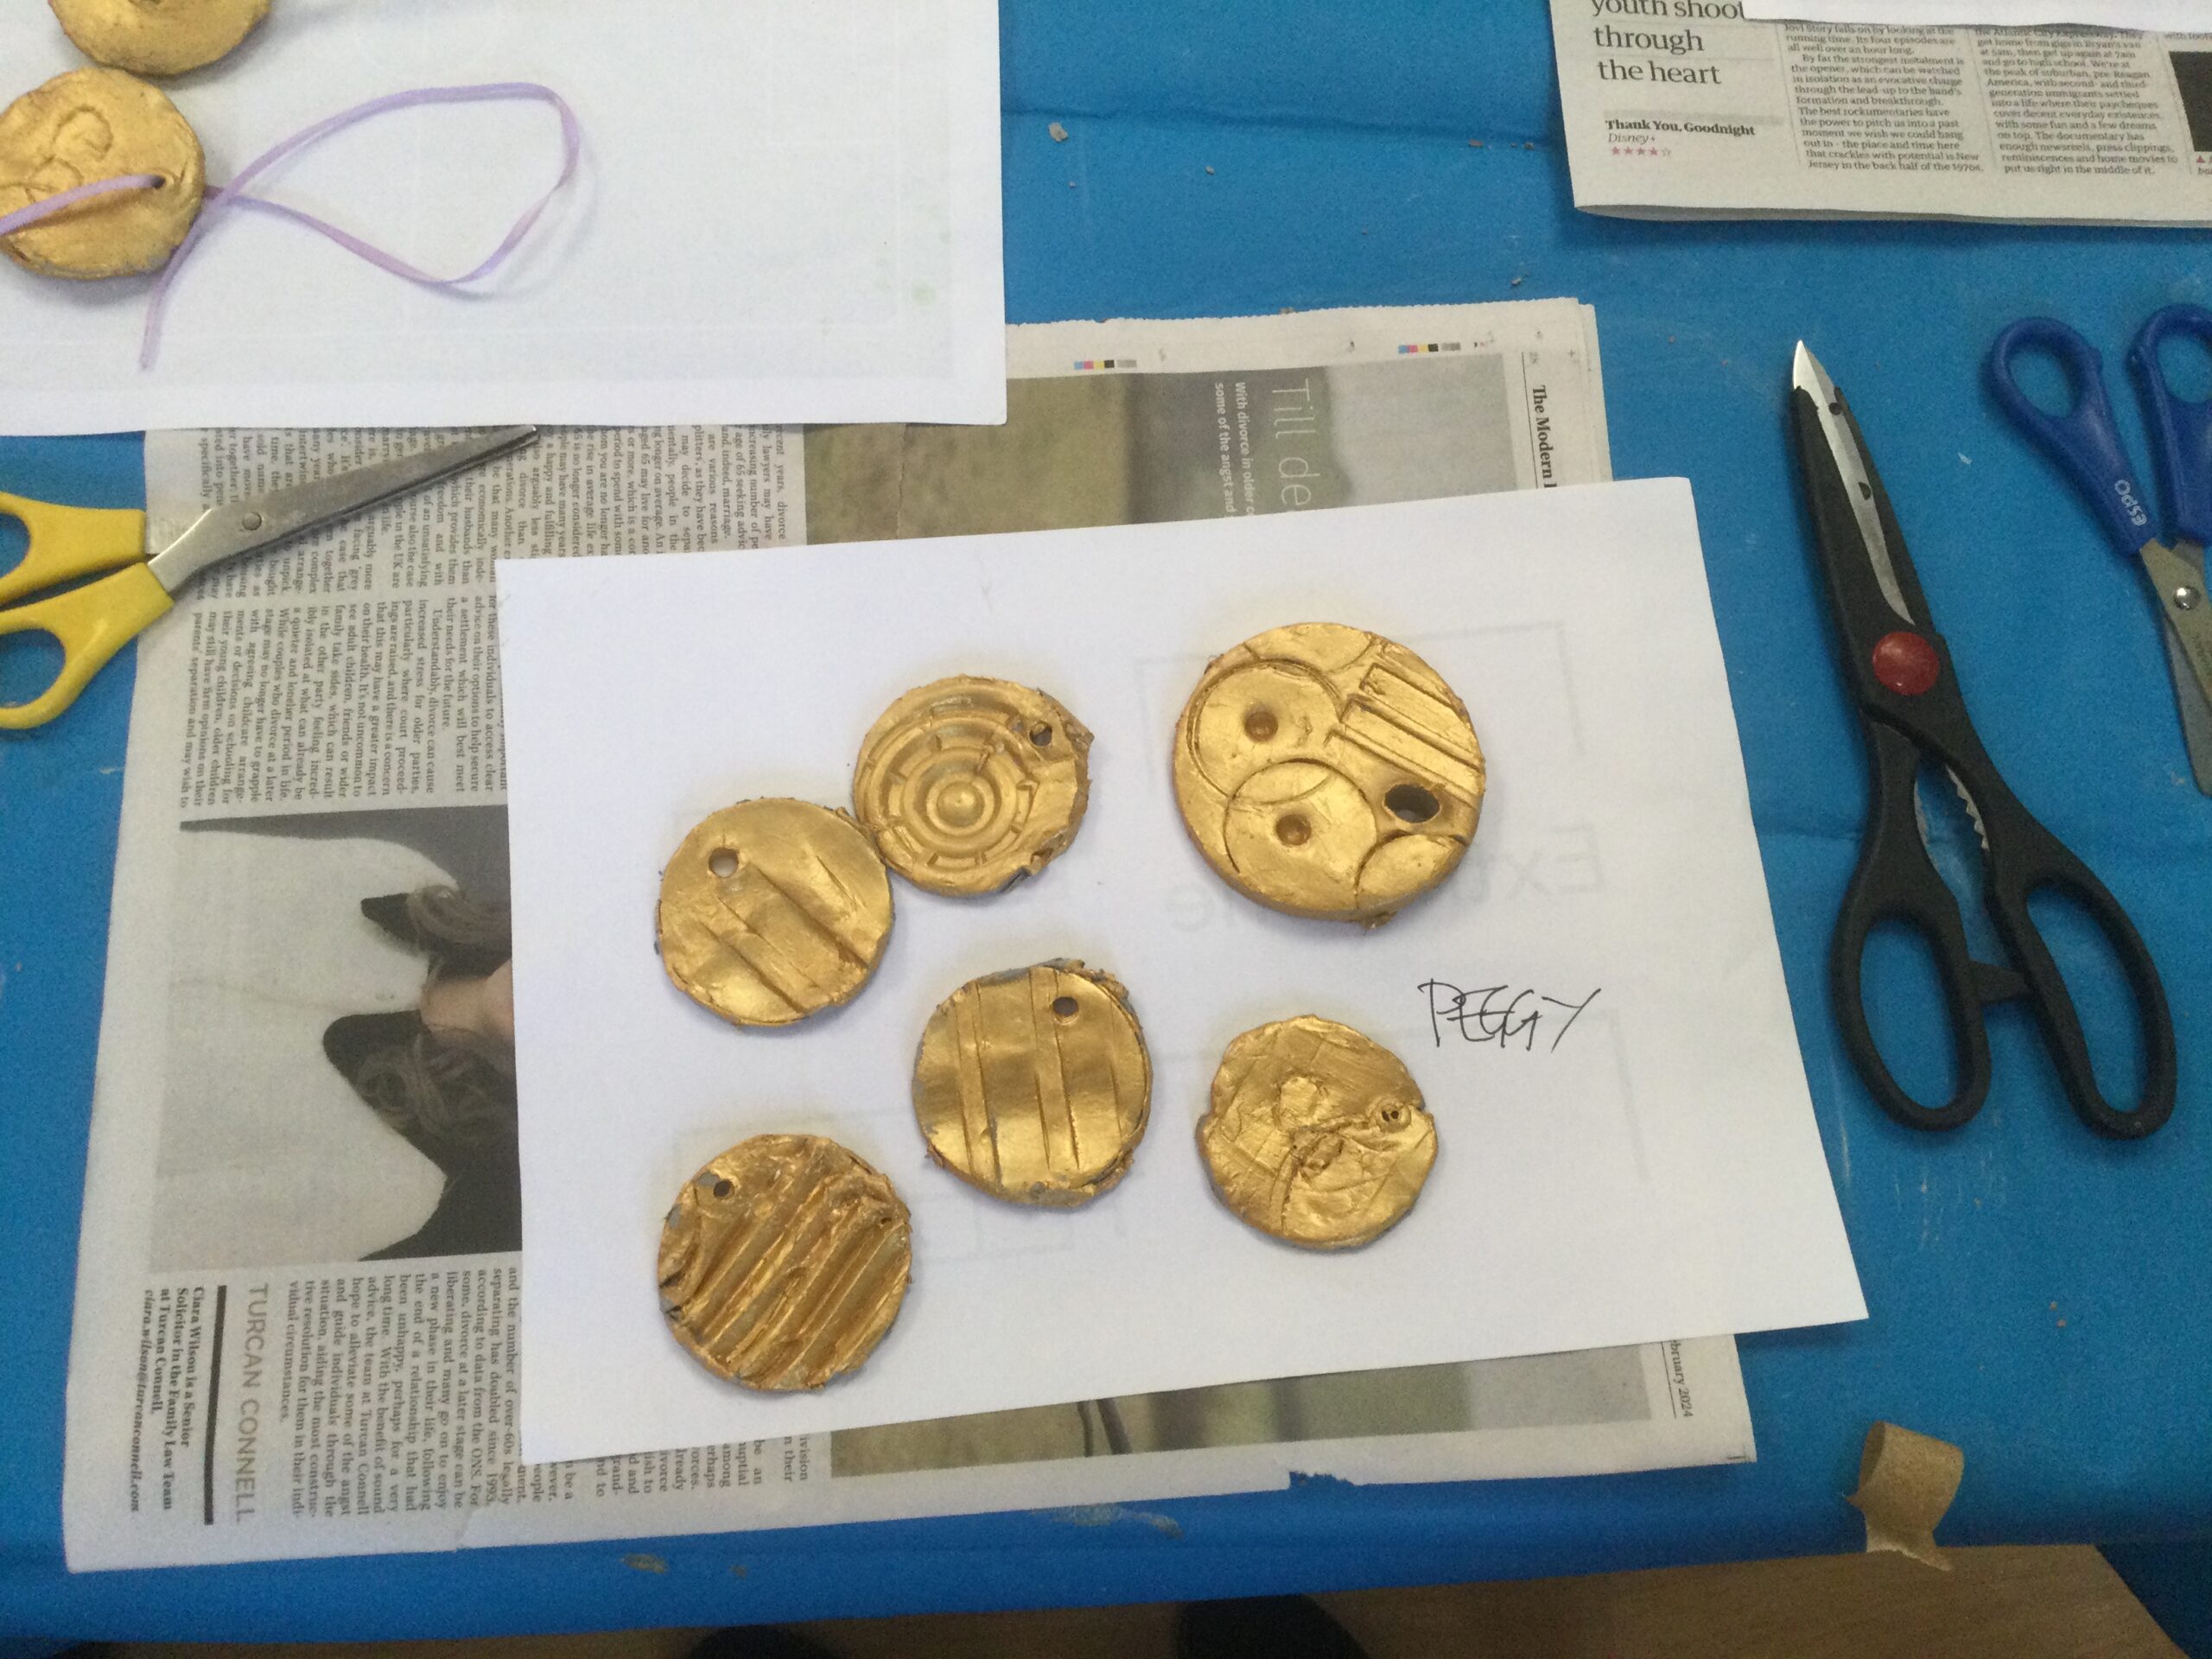 Six gold medals on a white sheet of paper, with more medals top left and pairs of scissors around